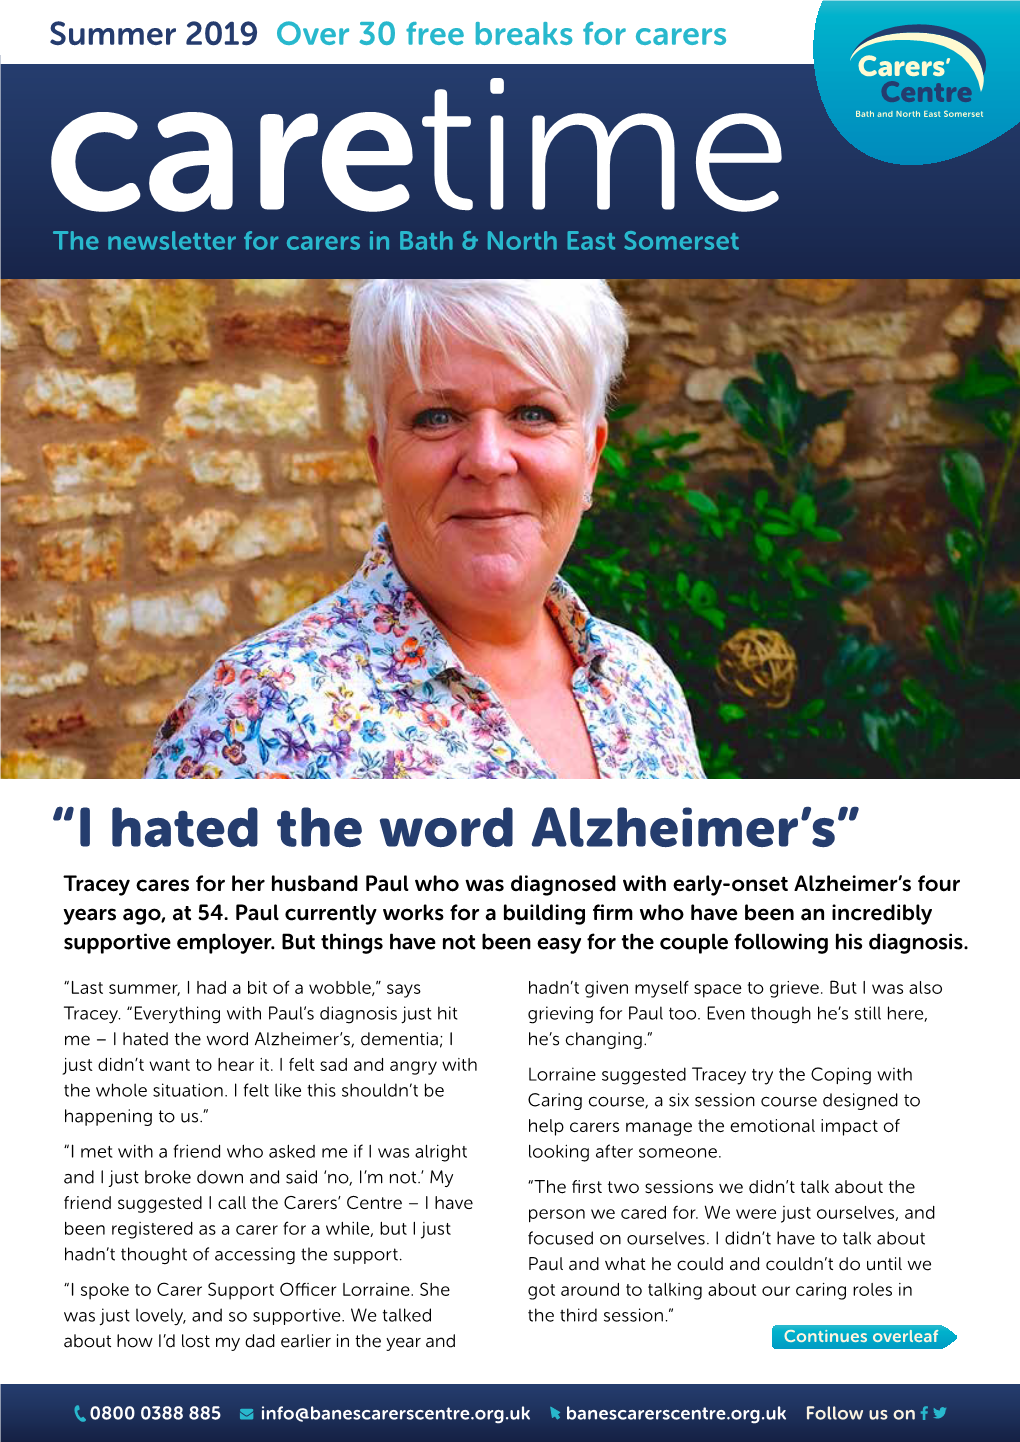 “I Hated the Word Alzheimer's”